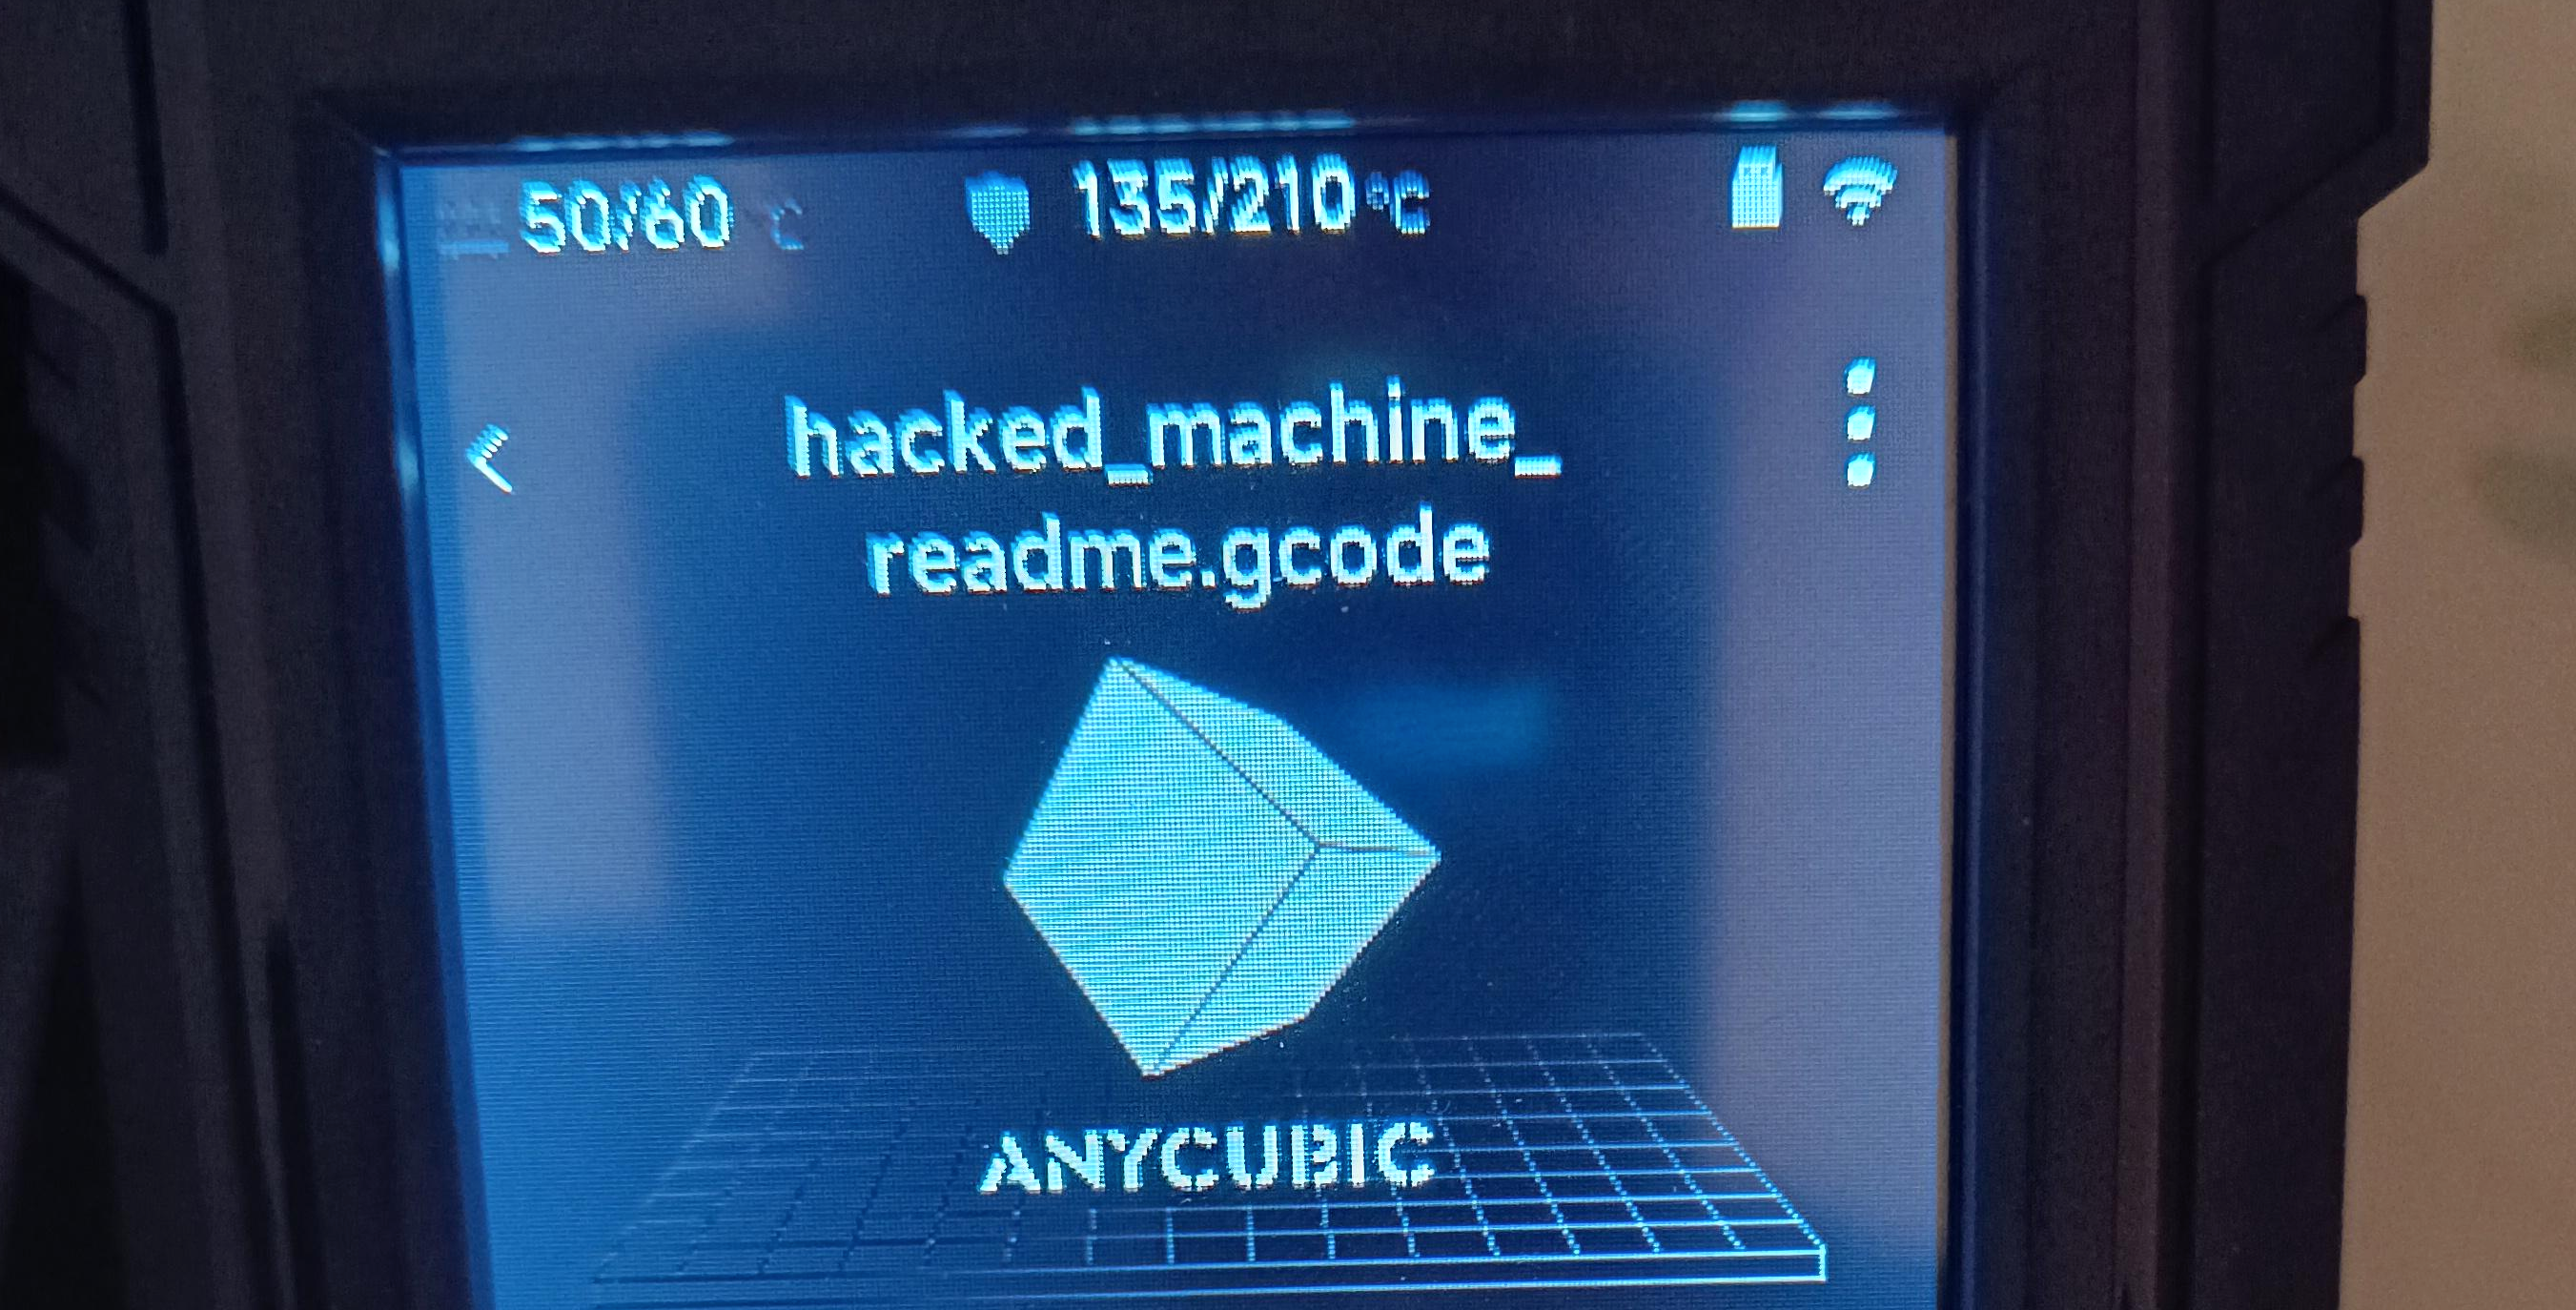 Anycubic 3D printer hacked message.png__PID:2bb411a1-d503-47d3-ae32-825db12d6b9f